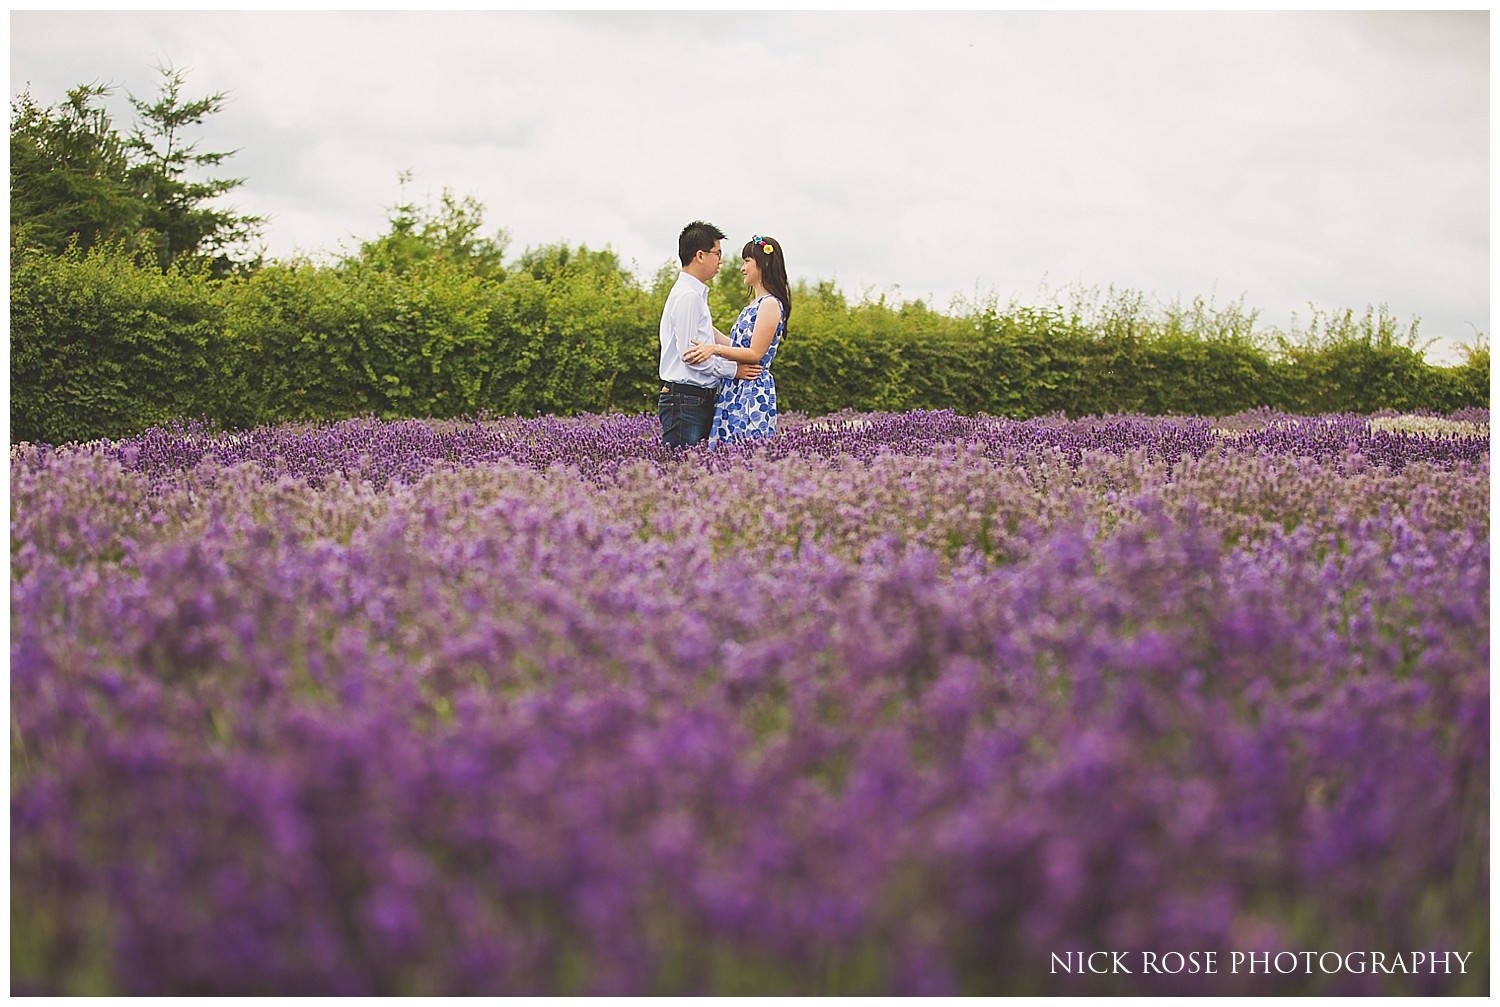  Couple standing in a lavender field during a Snowshill Lavender Farm pre wedding photography shoot 